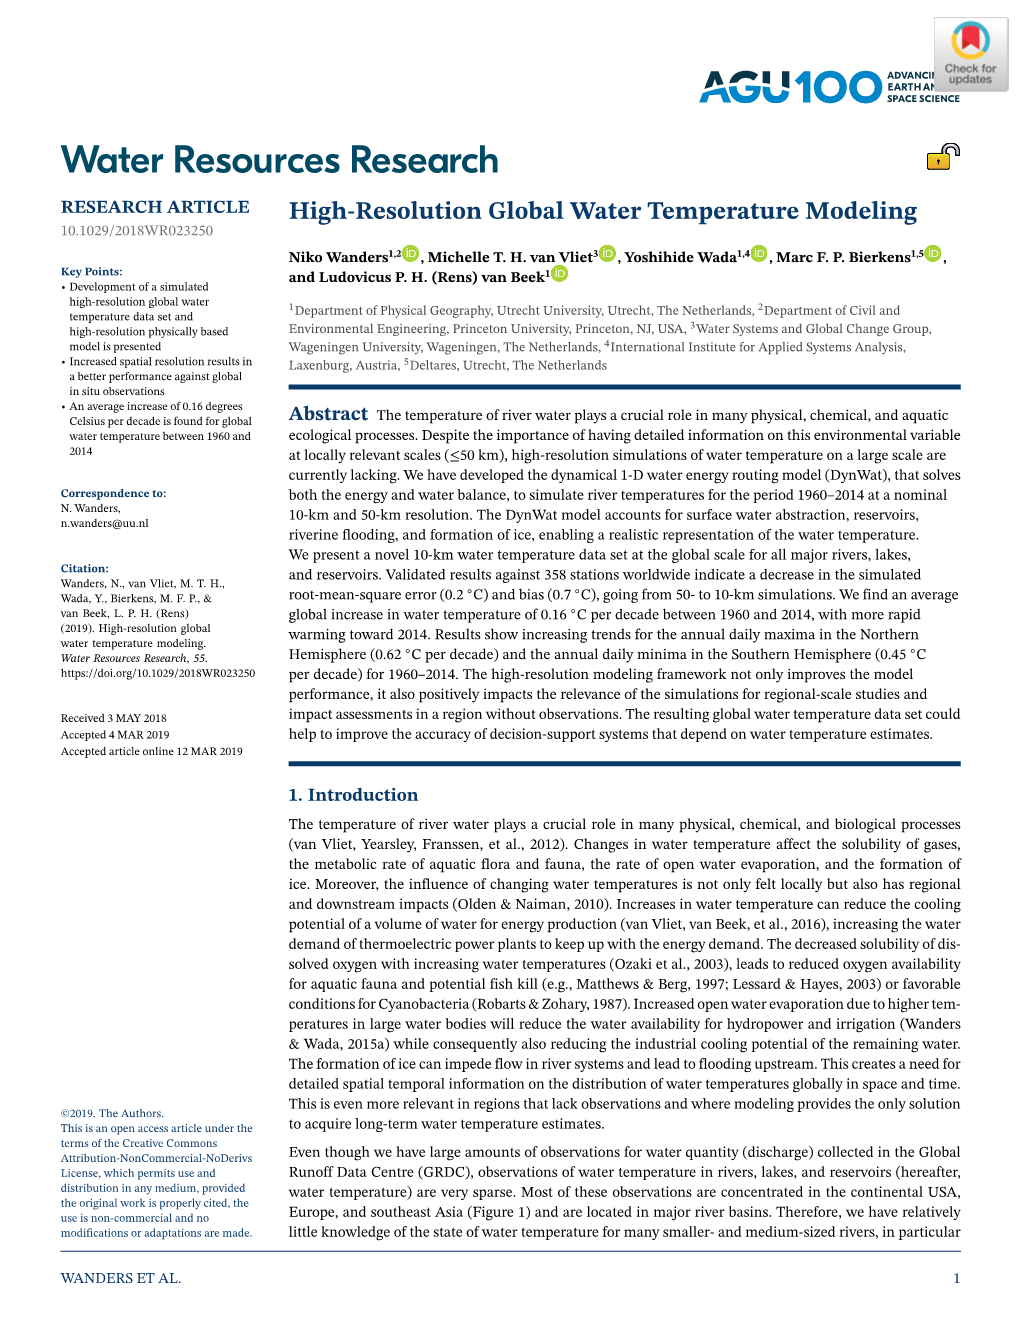 High‐Resolution Global Water Temperature Modeling